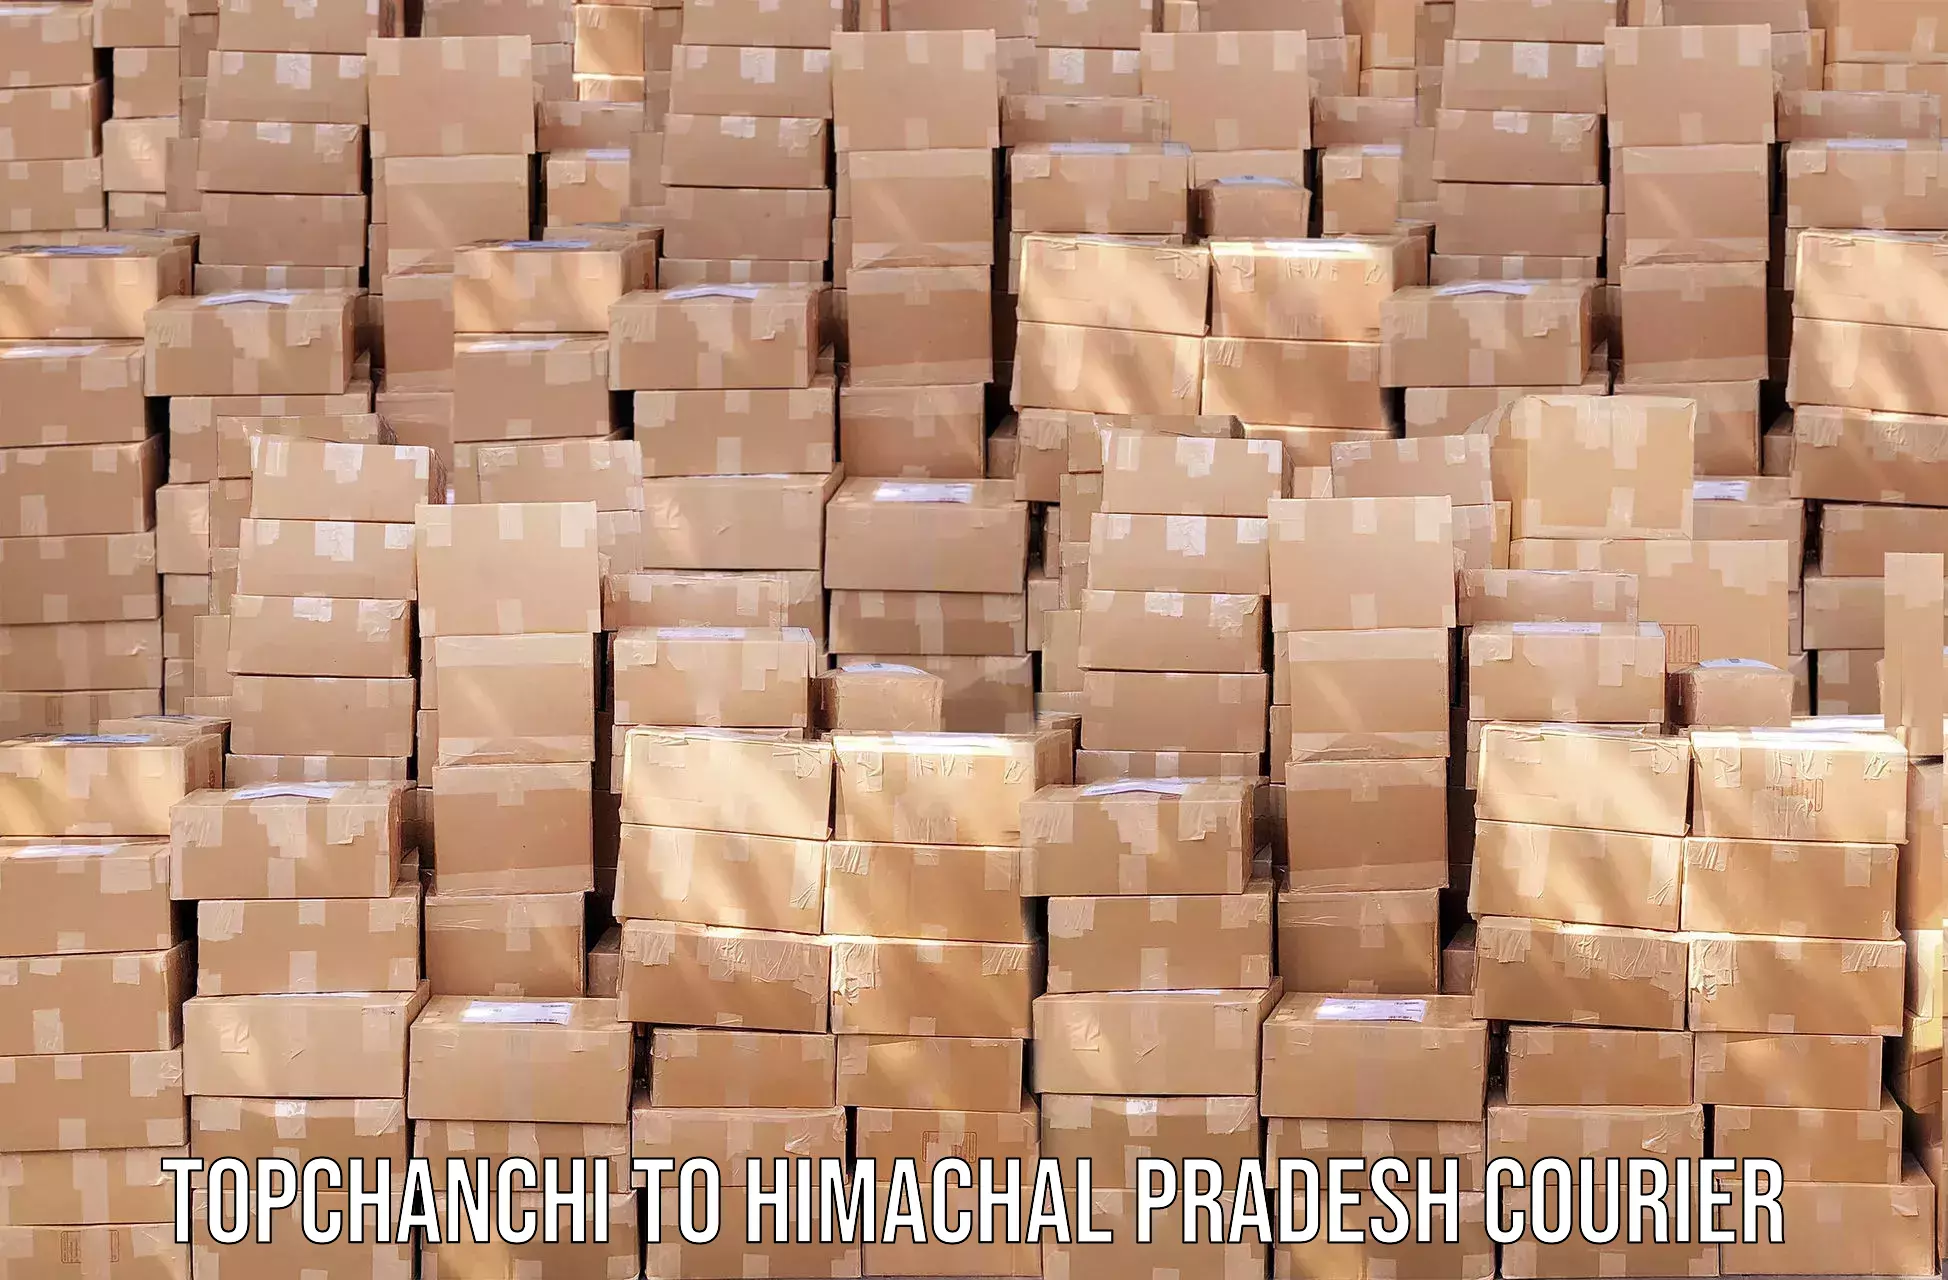 High-quality delivery services in Topchanchi to Himachal Pradesh